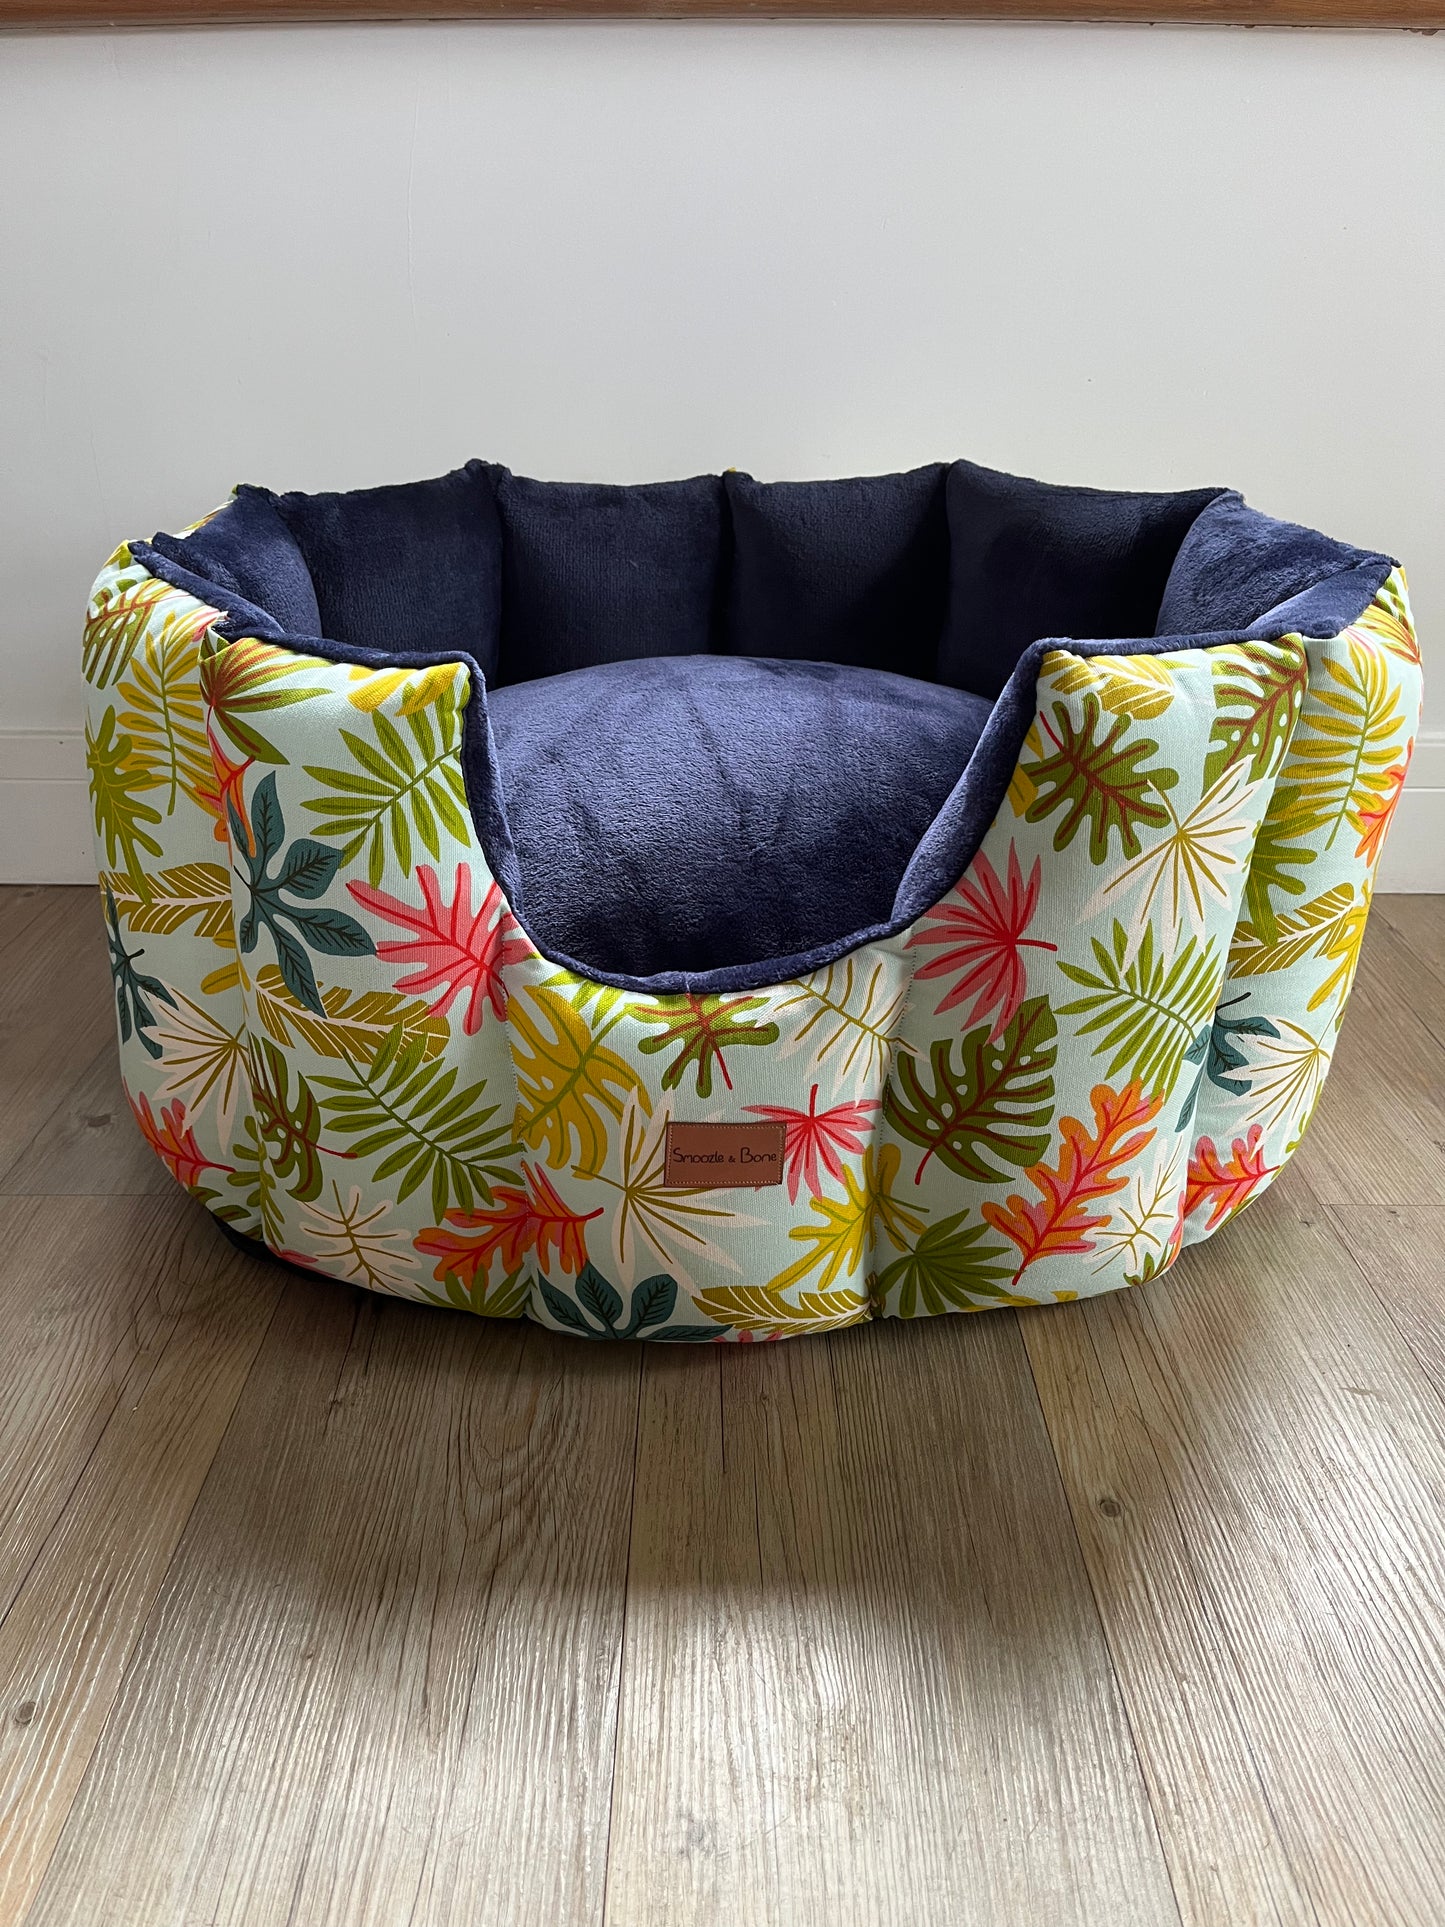 Leafy Hand-Made Cave Dog Bed